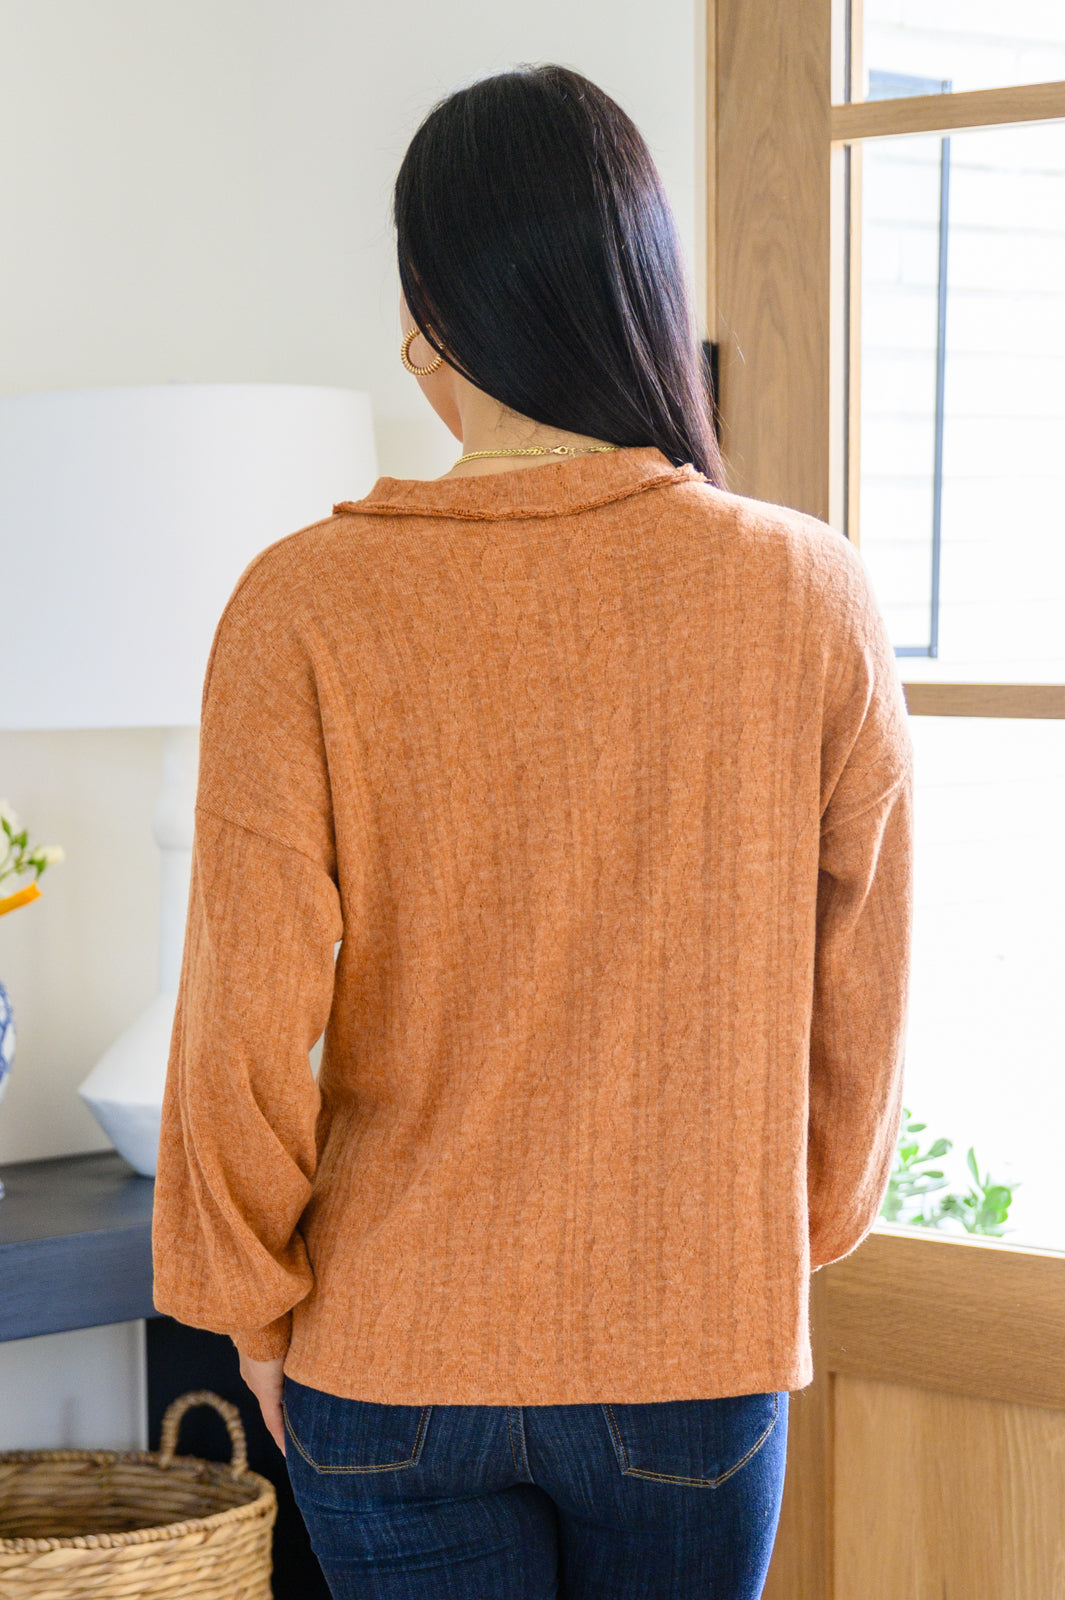 Speak Sweetly Textured Knit Top With Buttons In Rust